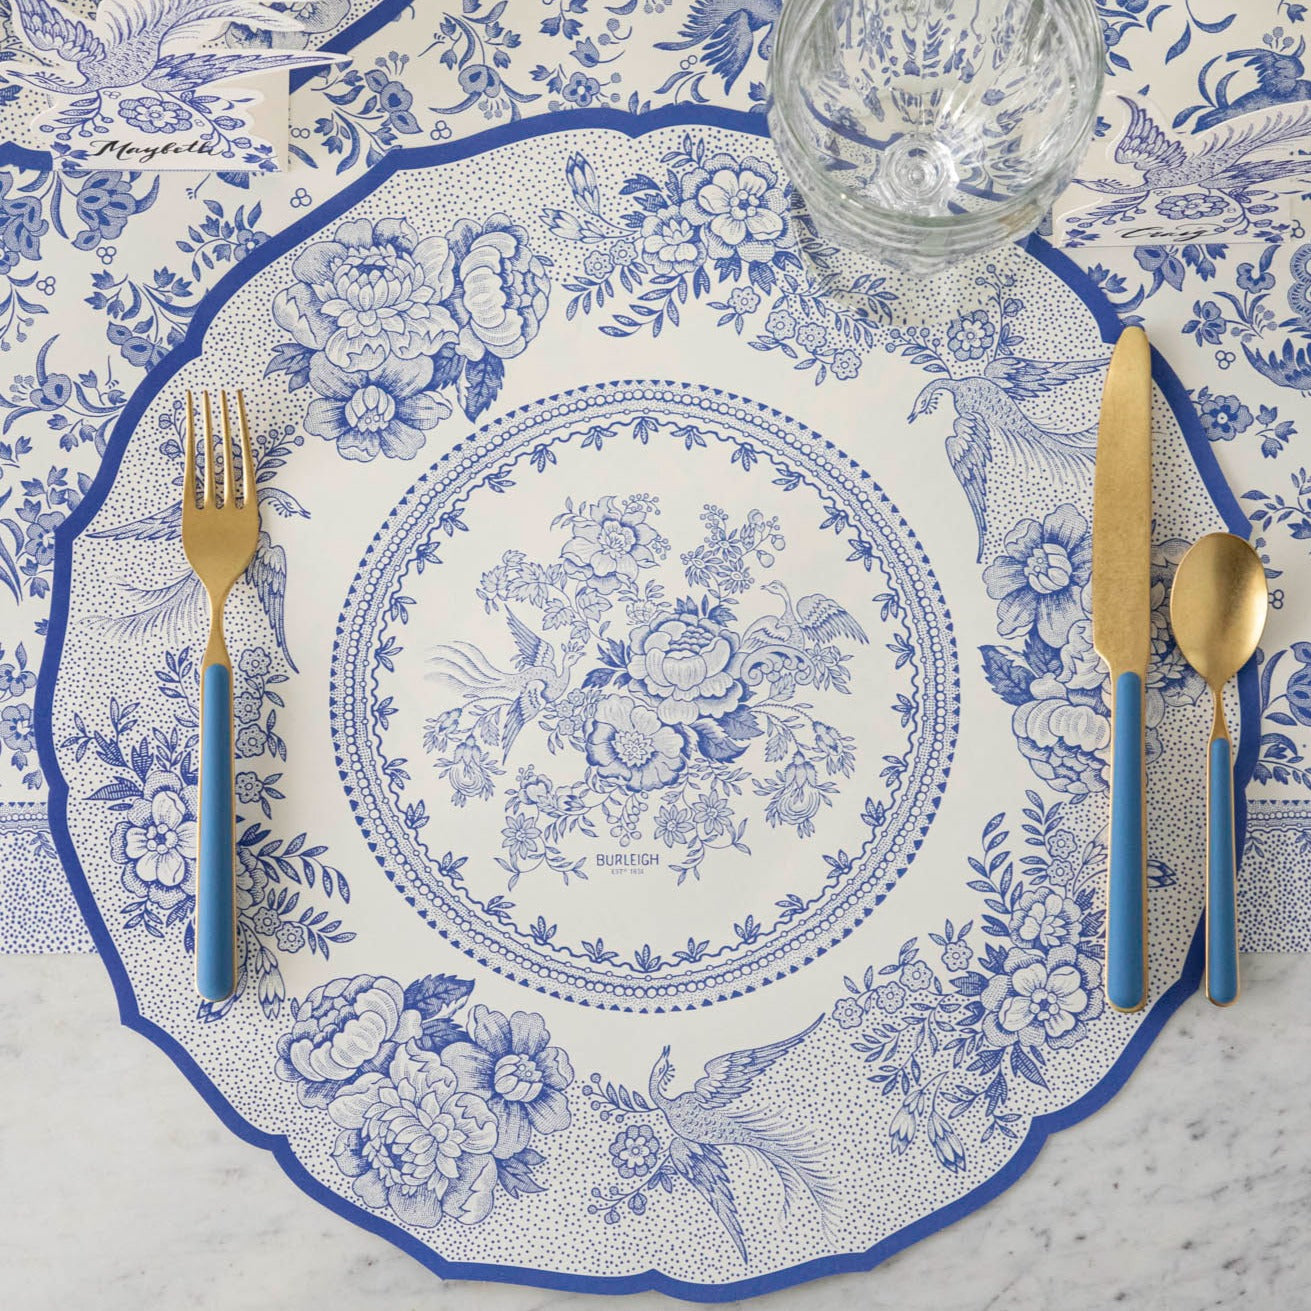 The Die-cut Blue Asiatic Pheasants Placemat in an elegant place setting sans plate, from above.